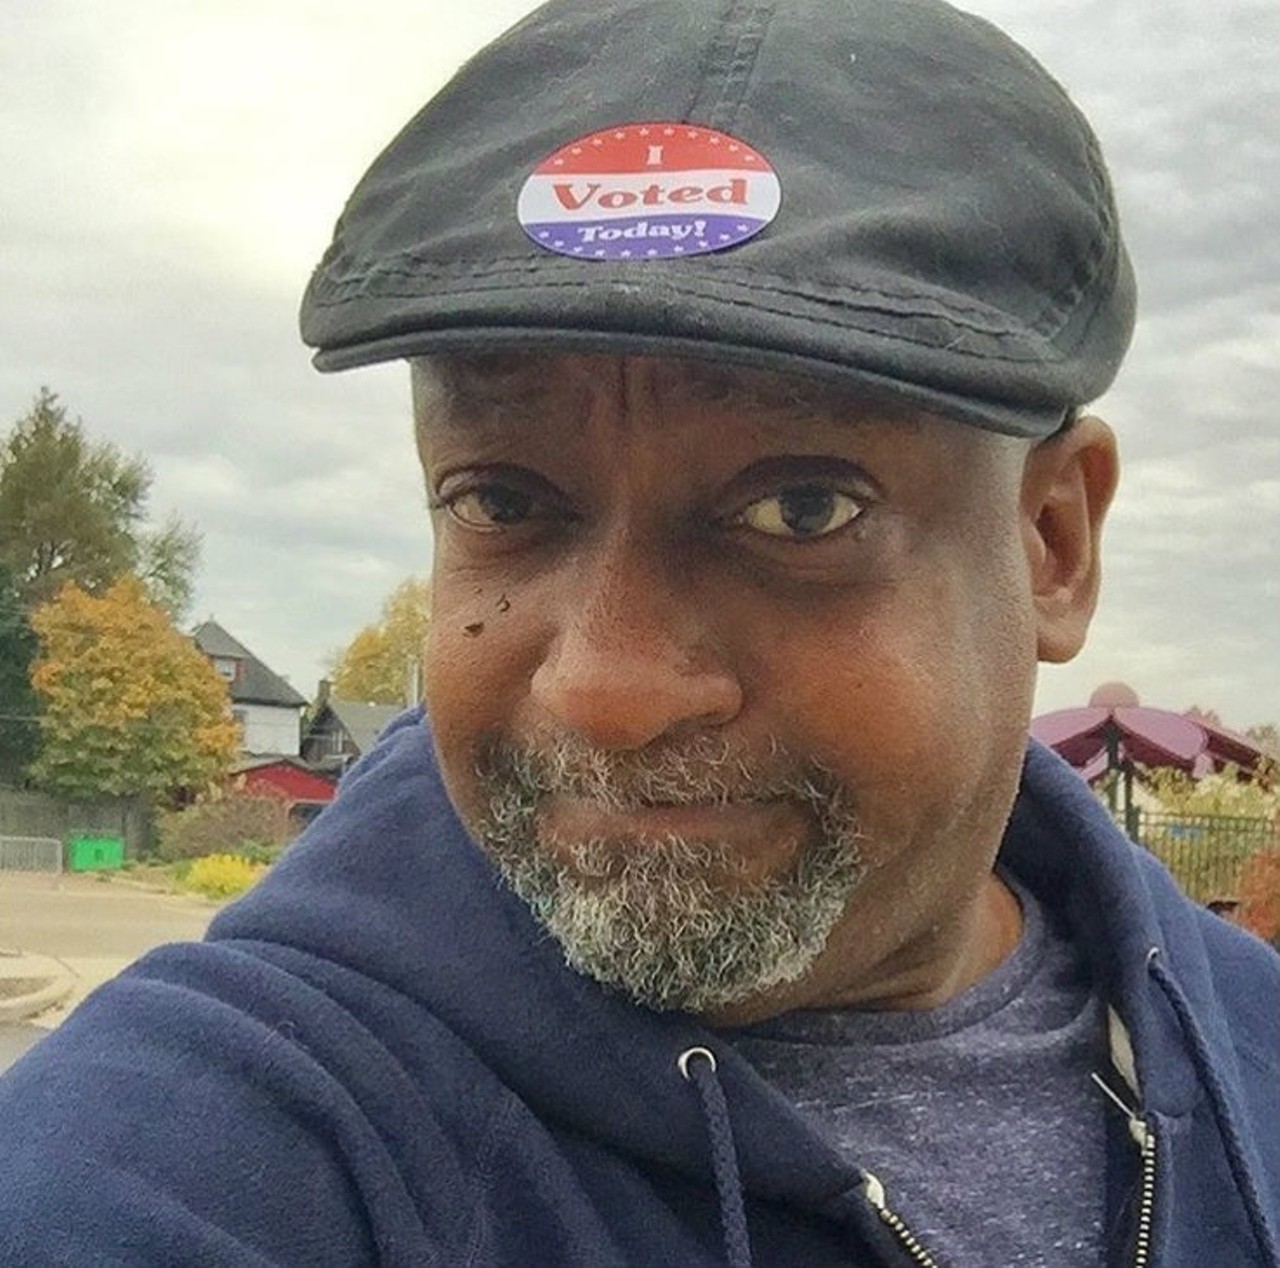 Who knew "I Voted" stickers made great hat accessories? Photo courtesy of Instagram / plsleet.